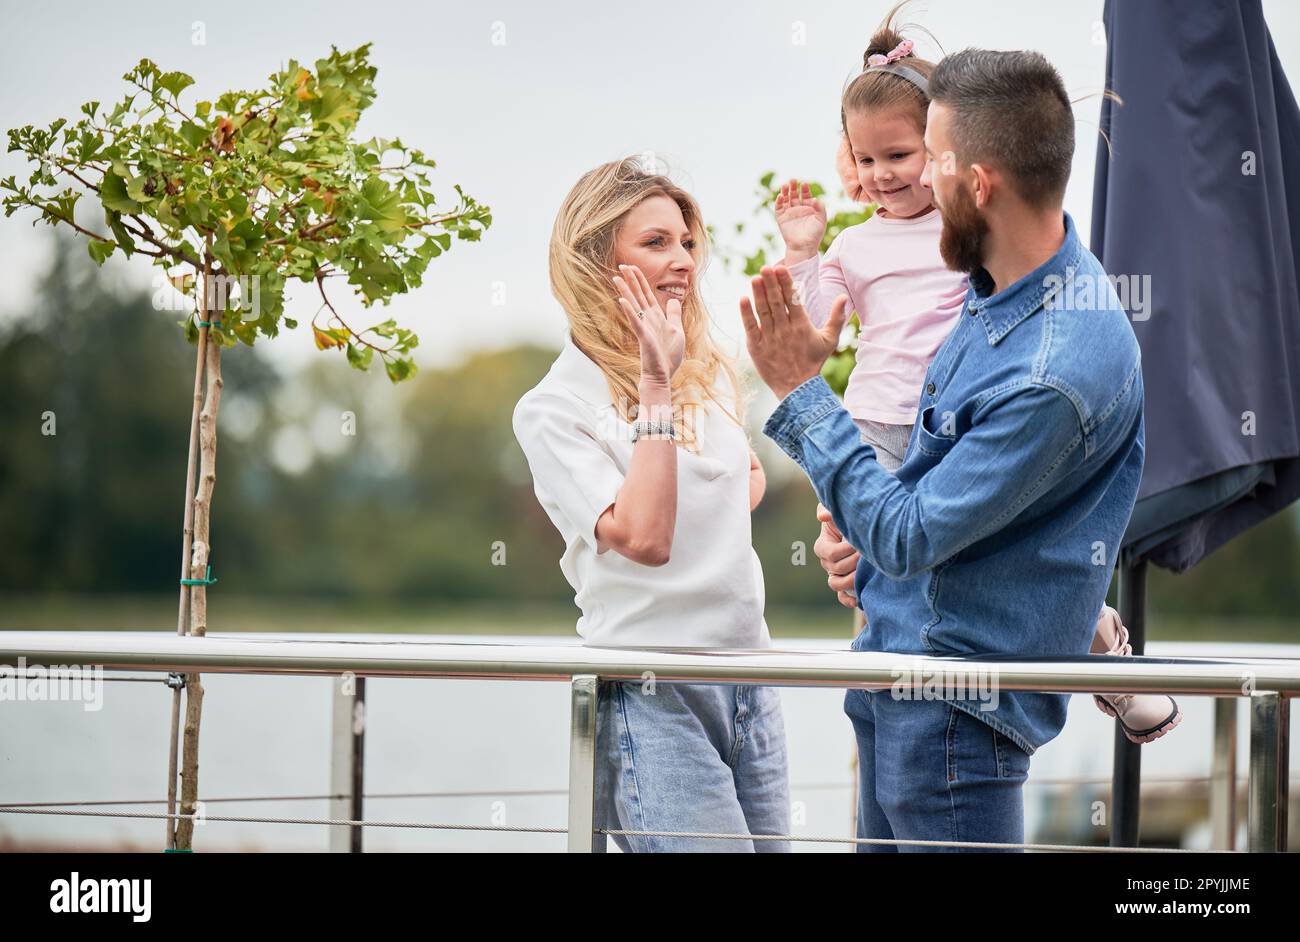 Cheerful woman, man and little girl standing near green tree and slapping hands giving high five outdoors. Happy man holding daughter and smiling while celebrating success with wife and child. Stock Photo